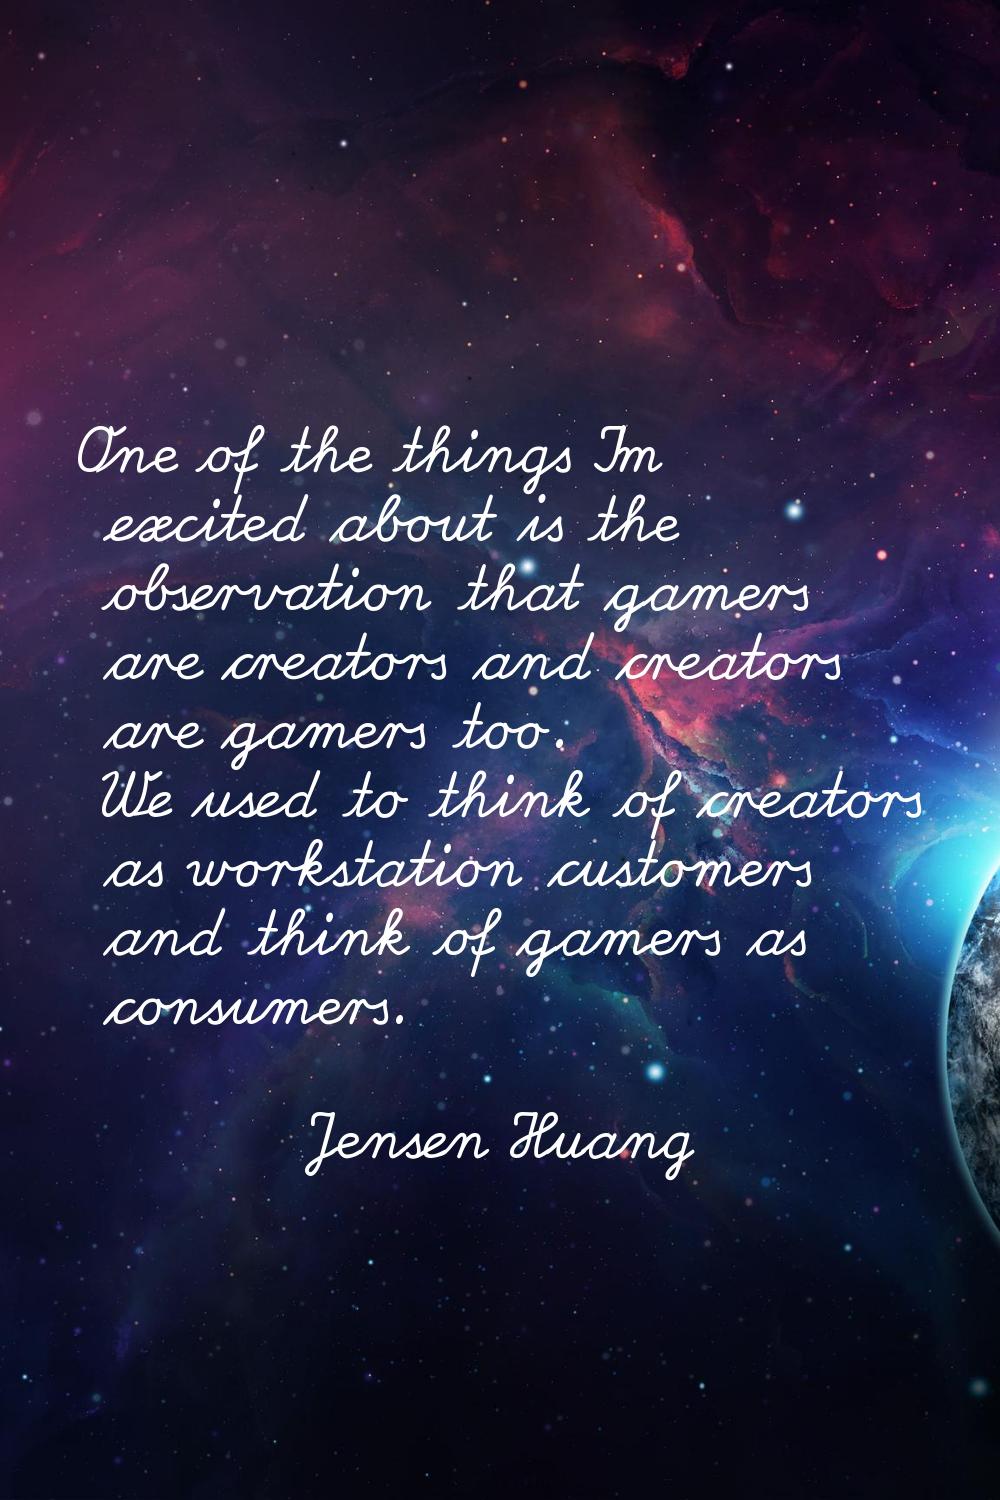 One of the things I'm excited about is the observation that gamers are creators and creators are ga